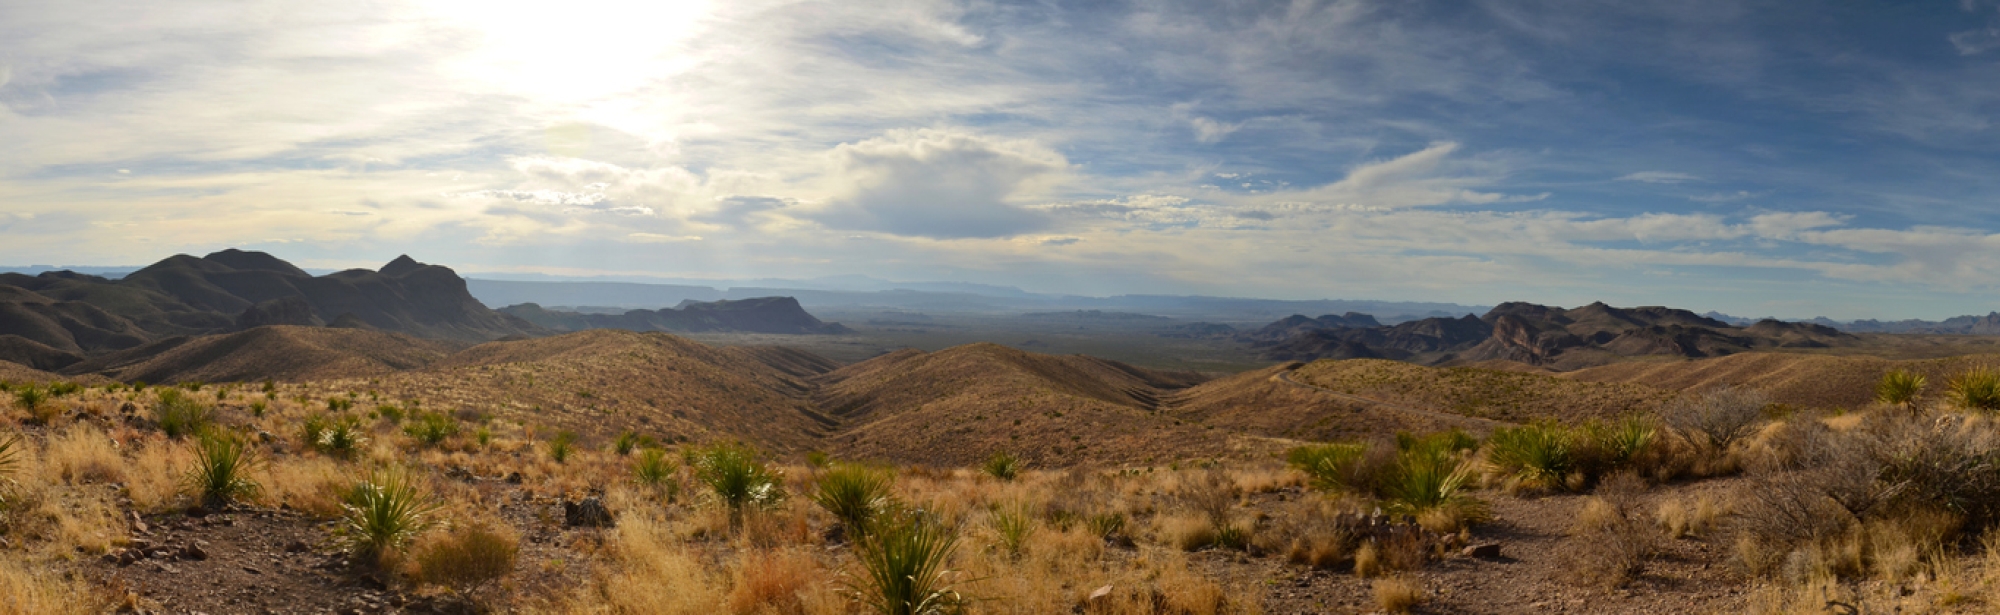 Panoramic of the Mountains in Big Bend National Park, Texas